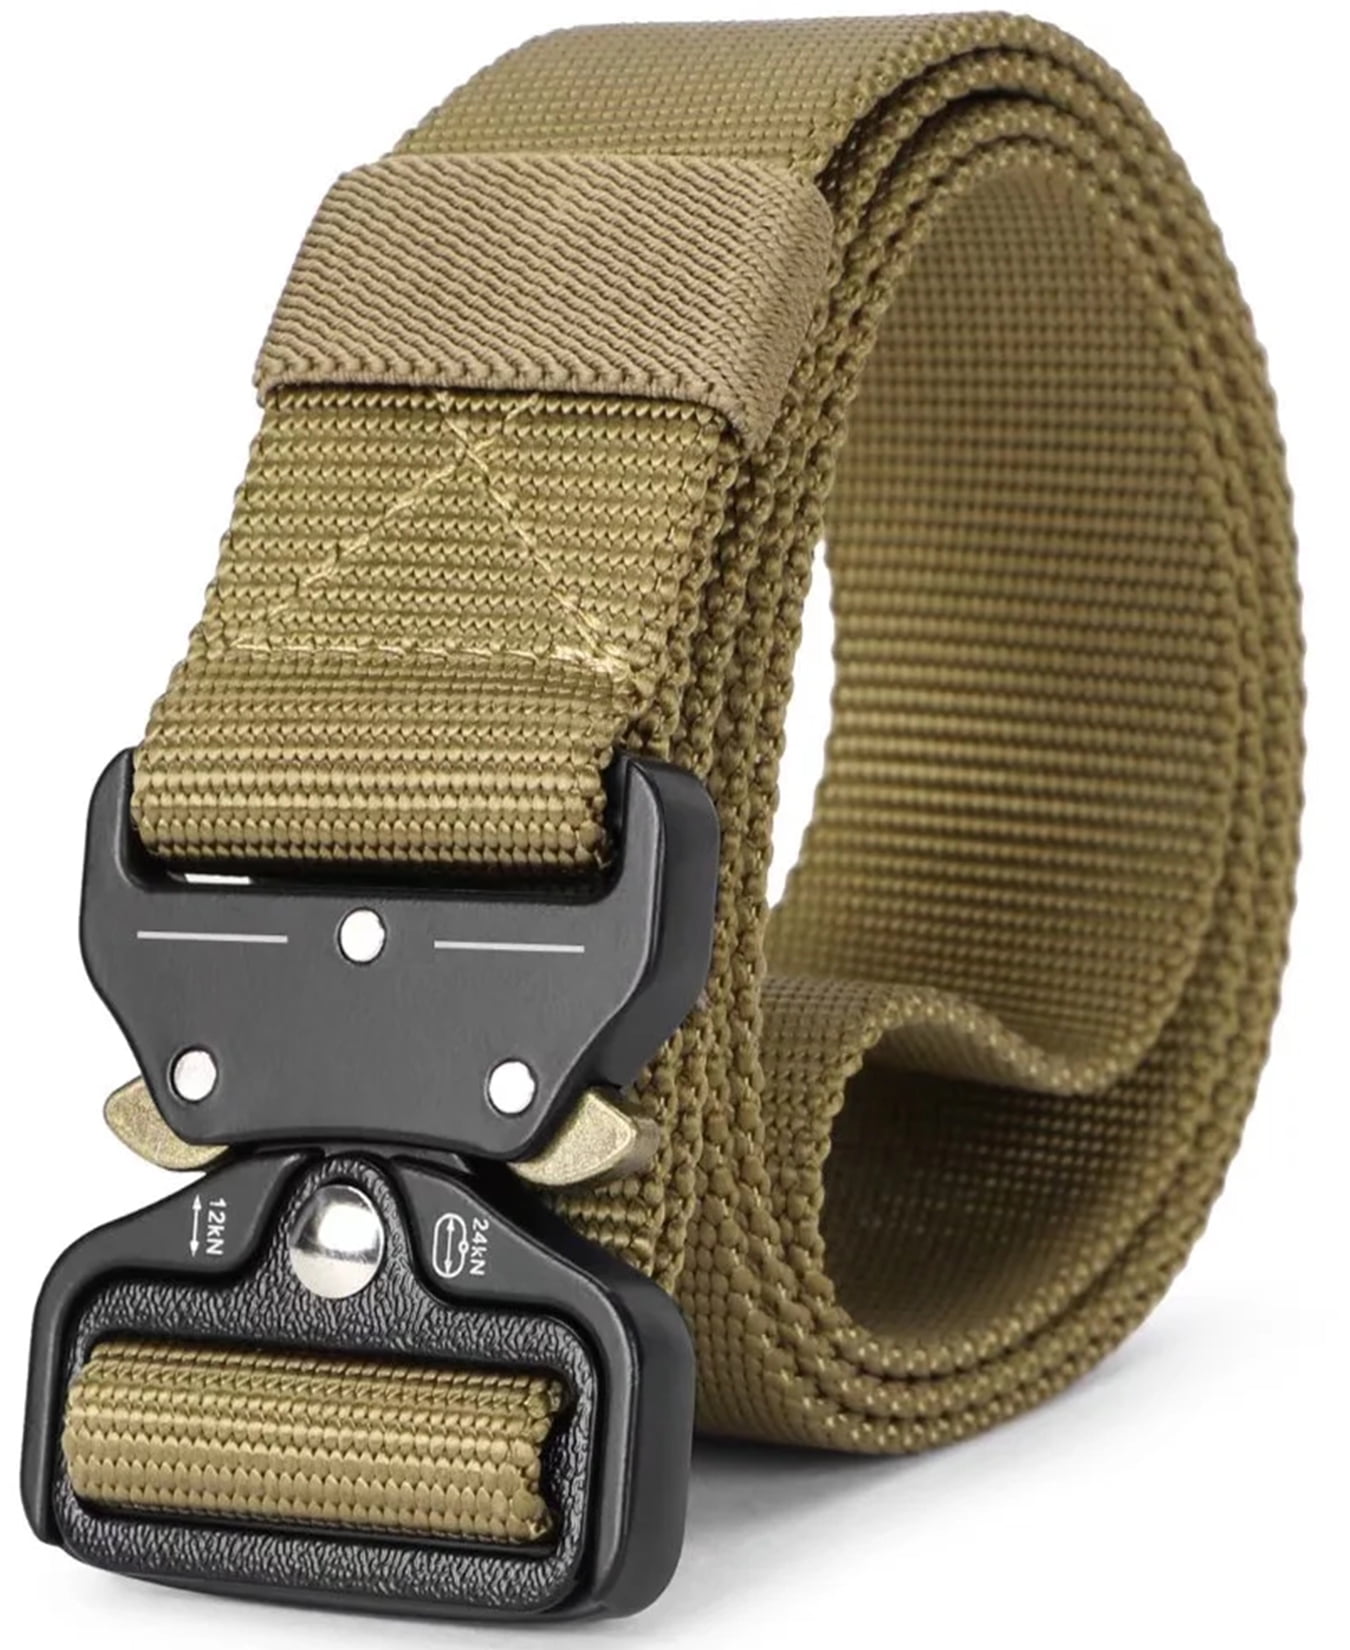 Sports Fan Belts with Metal Buckle Quick Release AIZESI 1,2PCS Nylon Military Tactical Belt Military Belt for Casual,Working,Training,Outdoor Sports,Hiking,Traveling,Combat,Army,Security 